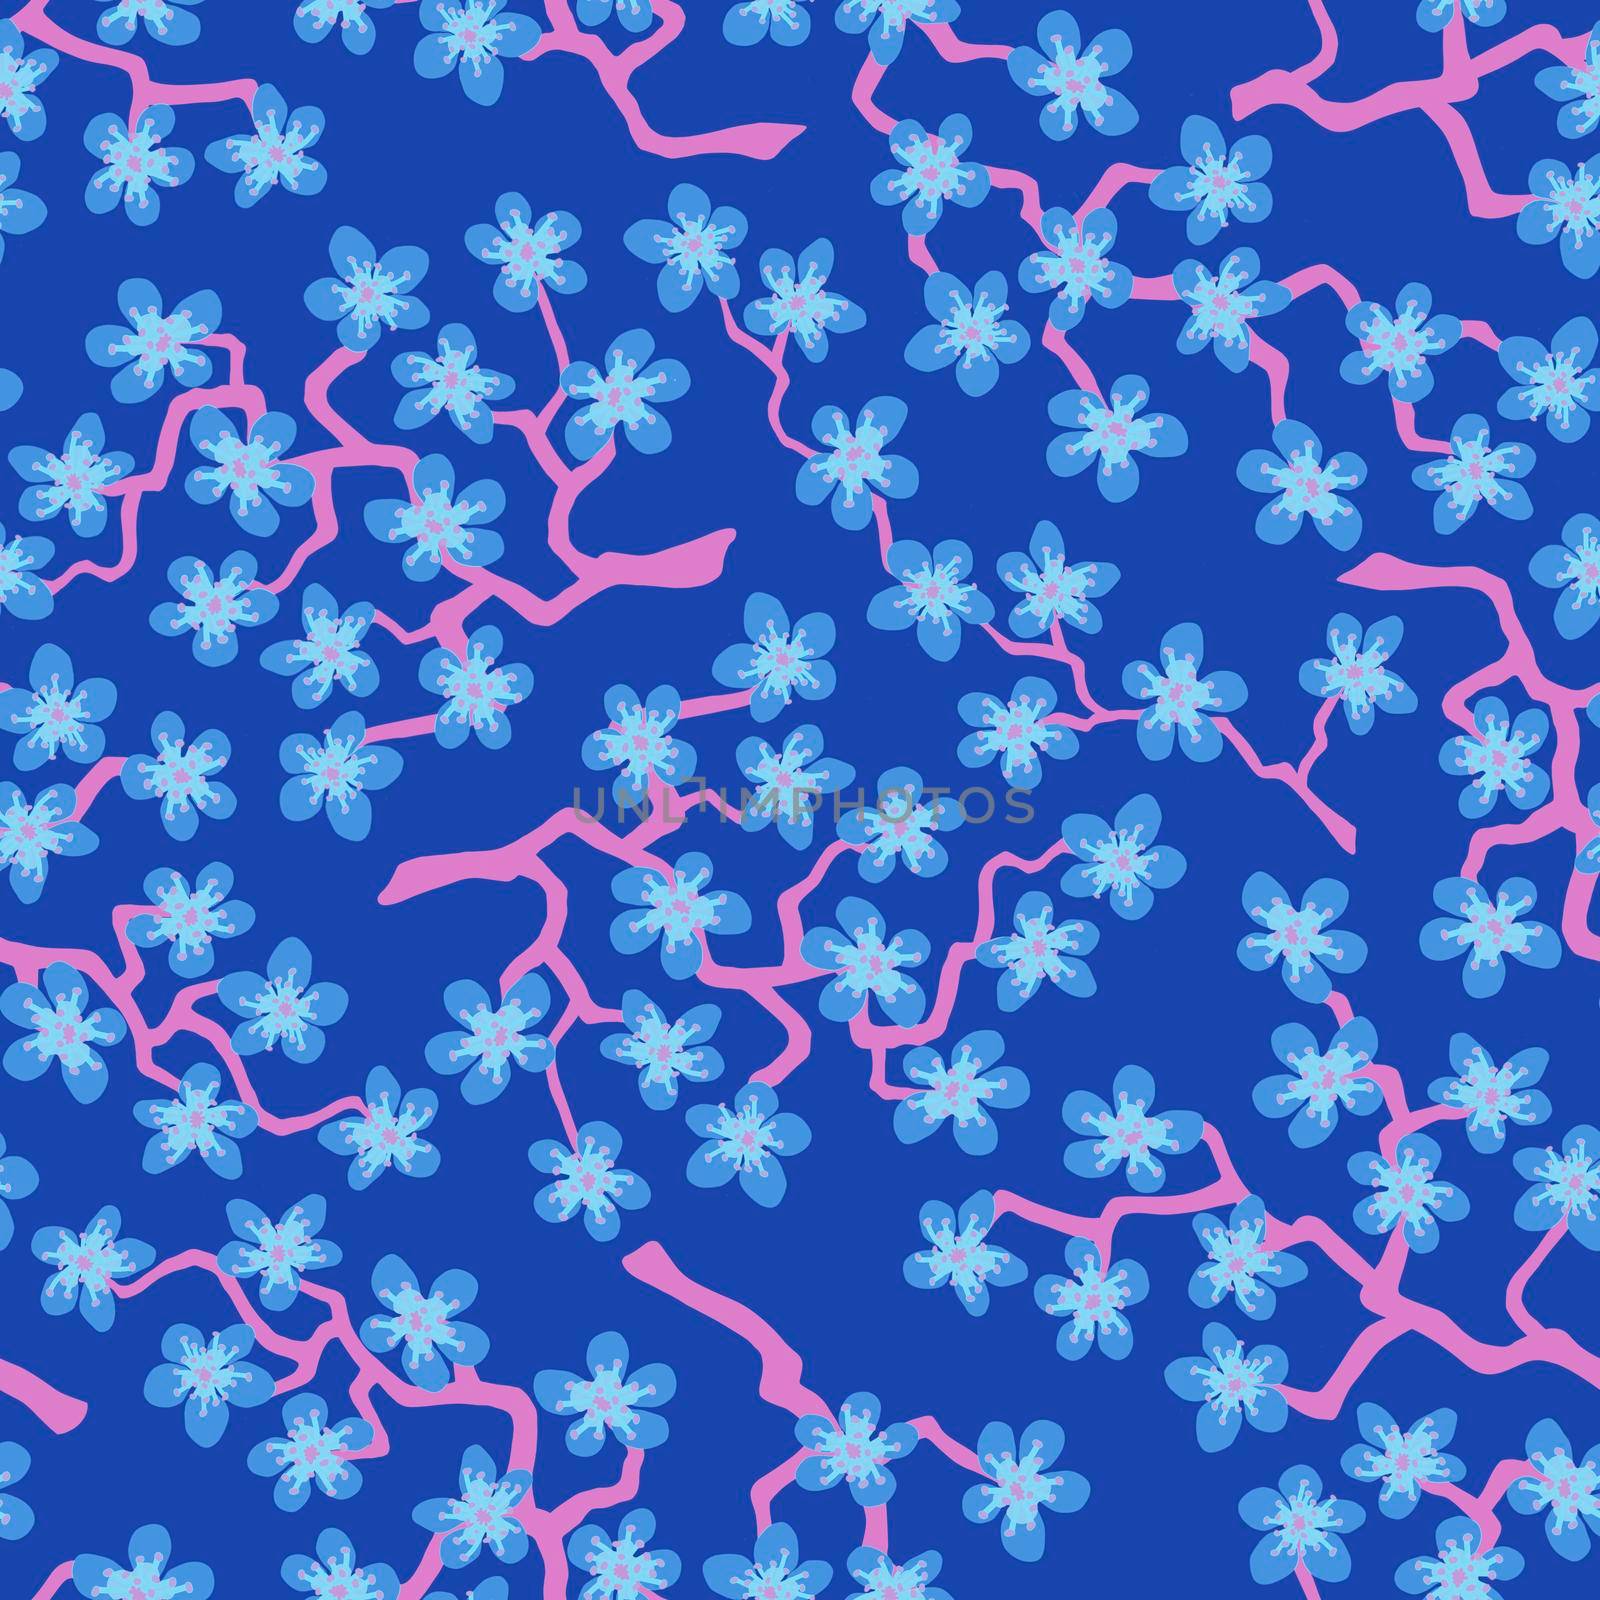 Seamless pattern with blossoming Japanese cherry sakura branches for fabric,packaging,wallpaper,textile decor,design, invitations,print,gift wrap,manufacturing.Heavenly flowers on azure background